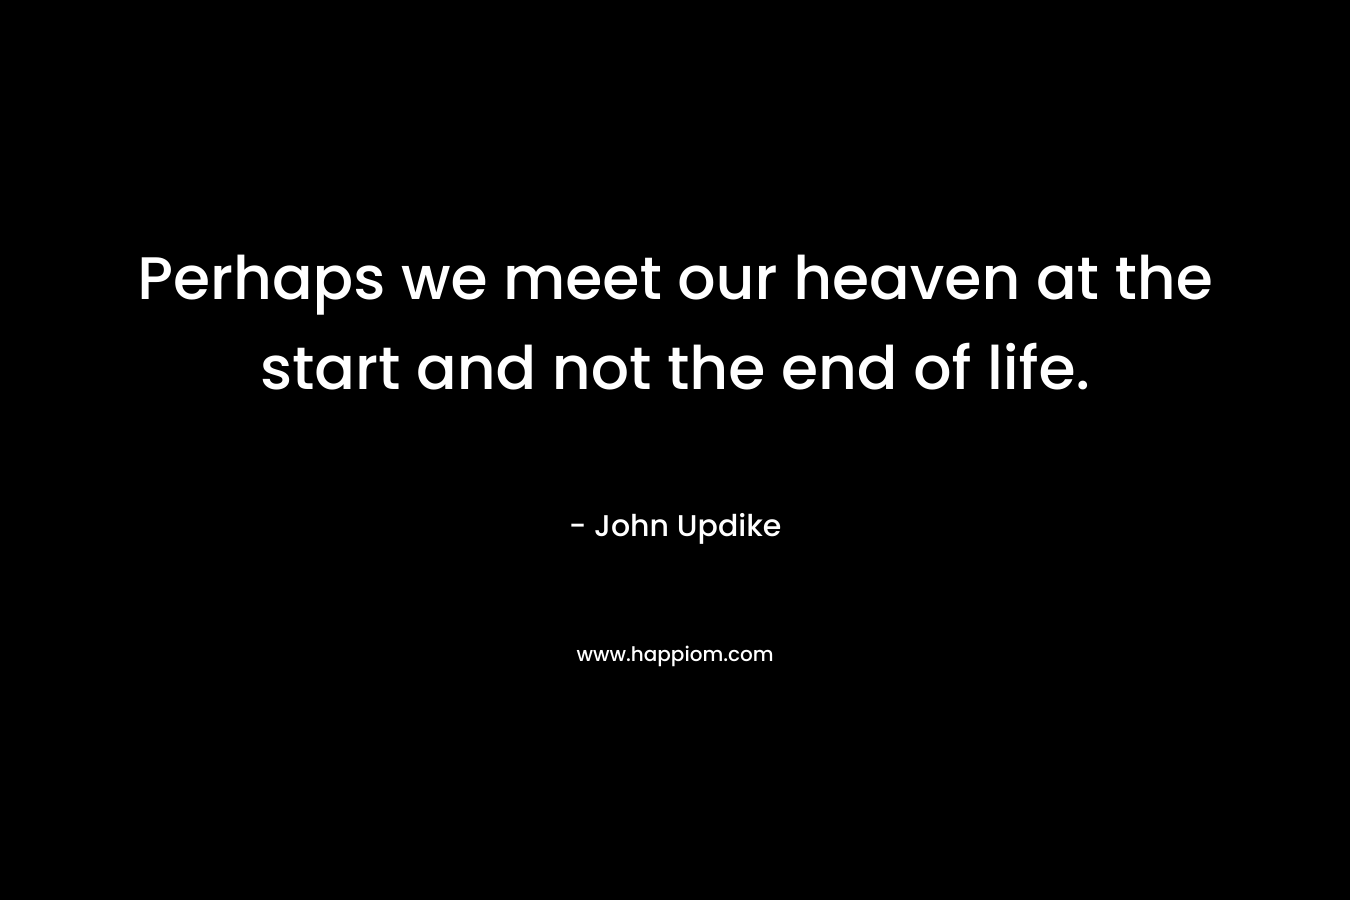 Perhaps we meet our heaven at the start and not the end of life. – John Updike